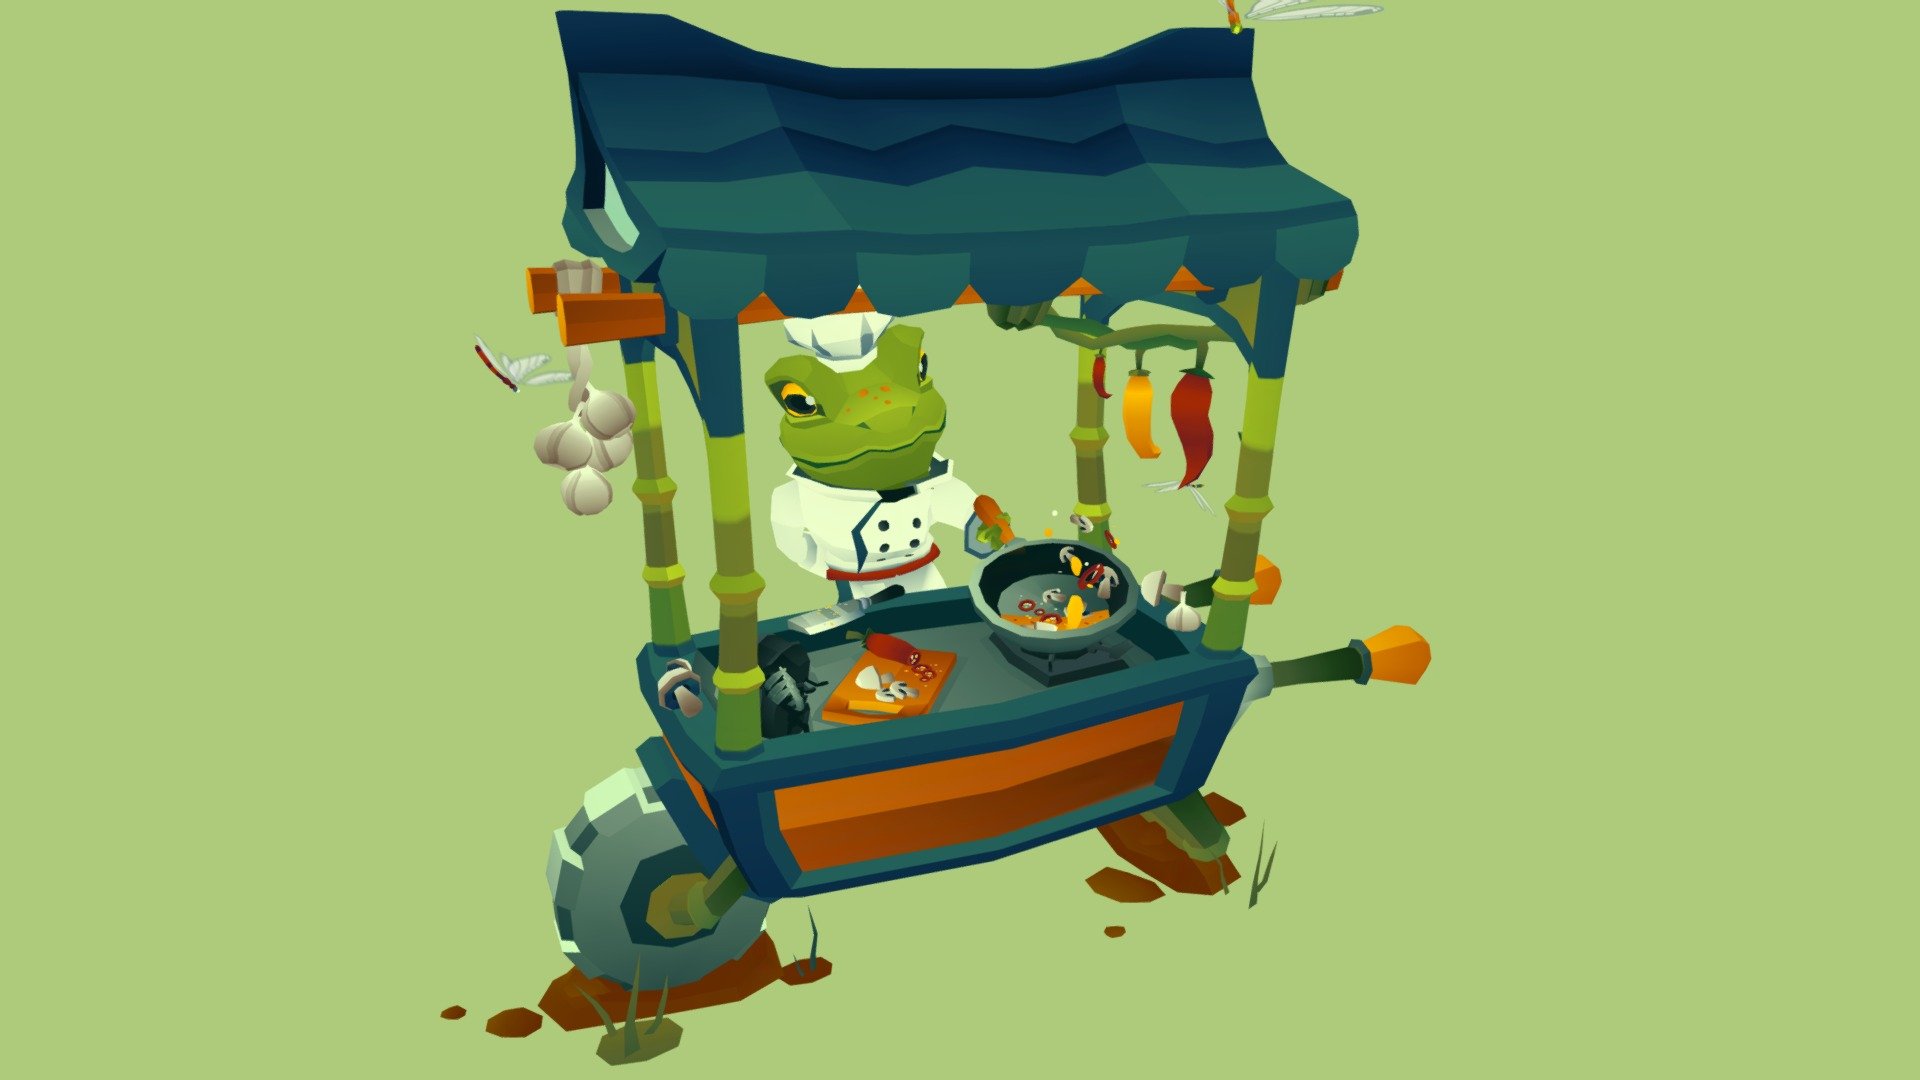 My entry (and first ever Sketchfab post!) for the Street Food Vendor Challenge - the Frog Chef!

Frog Chef has an excellent mobile setup and loves cooking on the go - swamp, ponds and even small lakes! There's no place too boggy that won't be serviced with a delcious and tasty meal. 

Bon appétit!


streetfoodchallenge - Street Food Vendor Challenge: Frog Chef! - 3D model by PaulaLucas 3d model